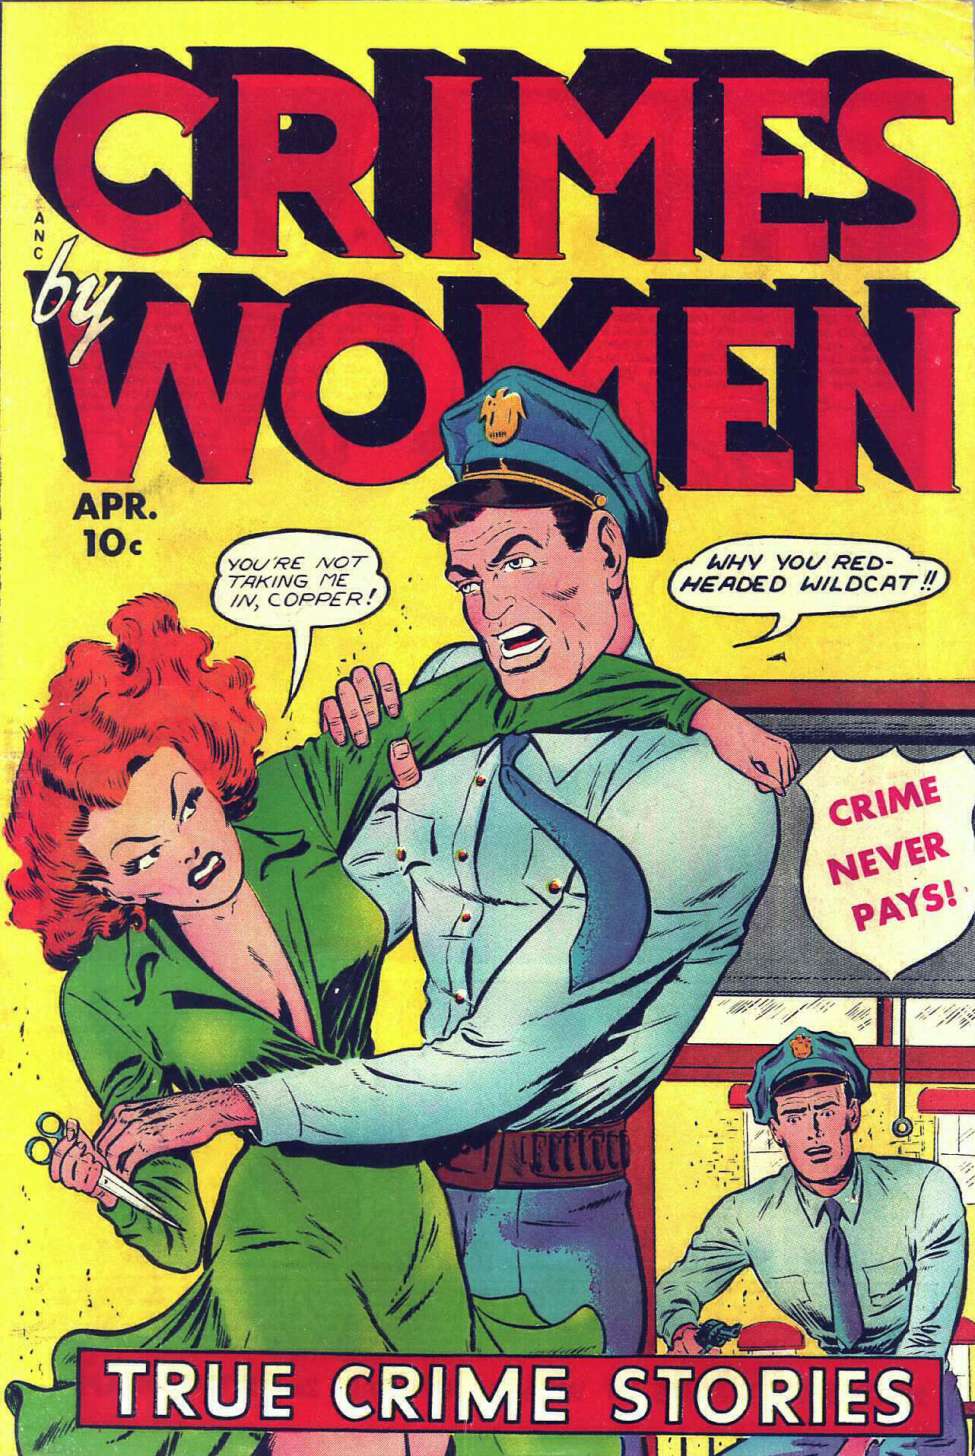 Book Cover For Crimes By Women 12 - Version 1